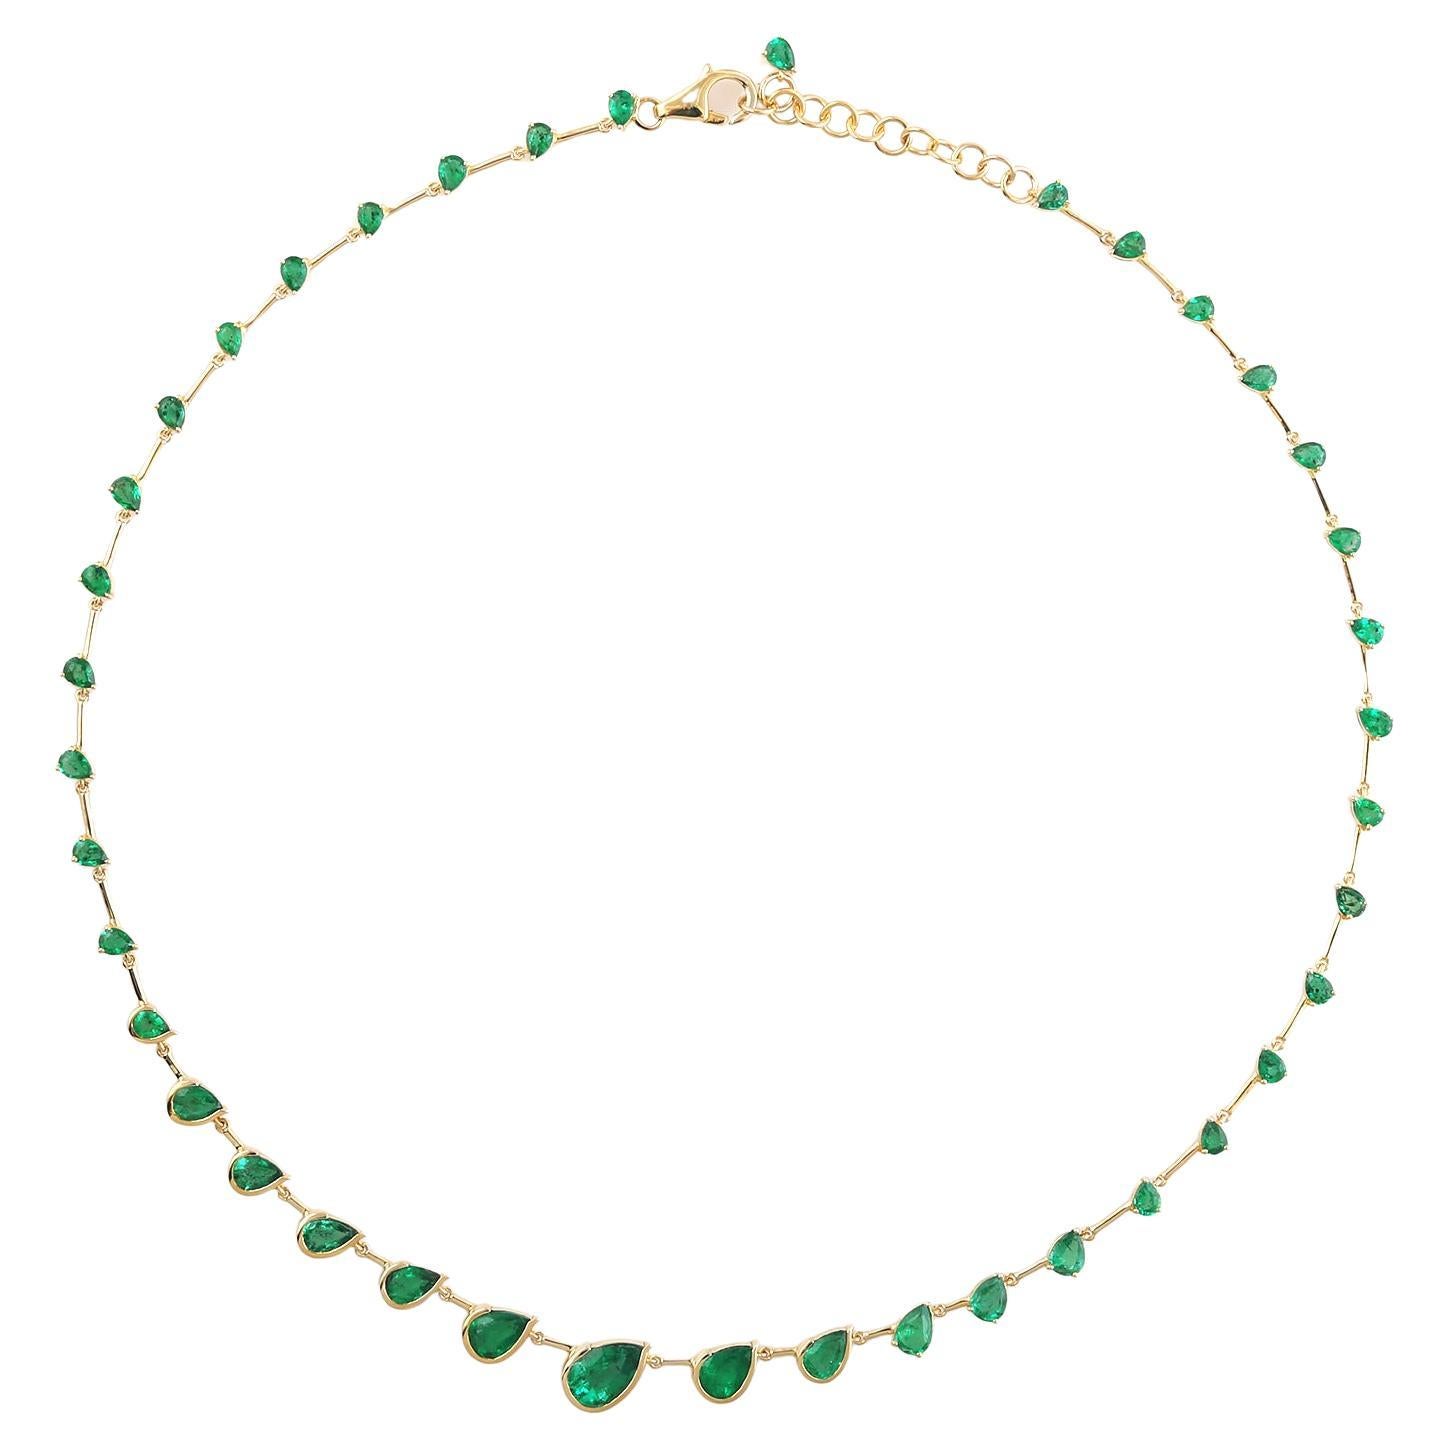 8.96 ct Pear Shaped Emerald Chain Necklace Made In 18k yellow Gold